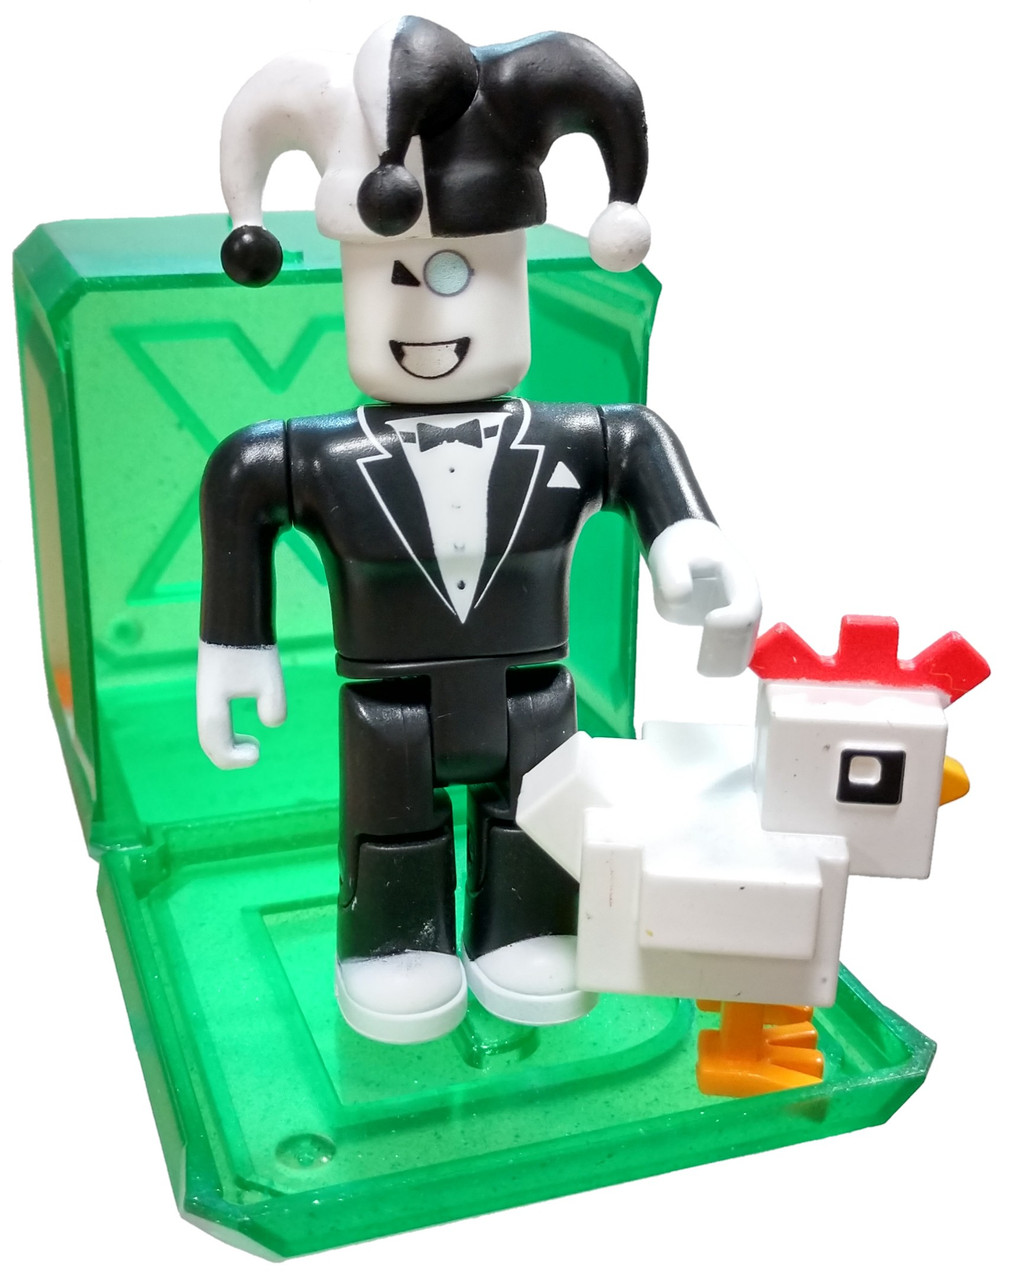 Roblox Celebrity Collection Series 4 Sirming 3 Mini Figure With Green Cube And Online Code Loose Jazwares Toywiz - details about new roblox the plaza jet skiers with code